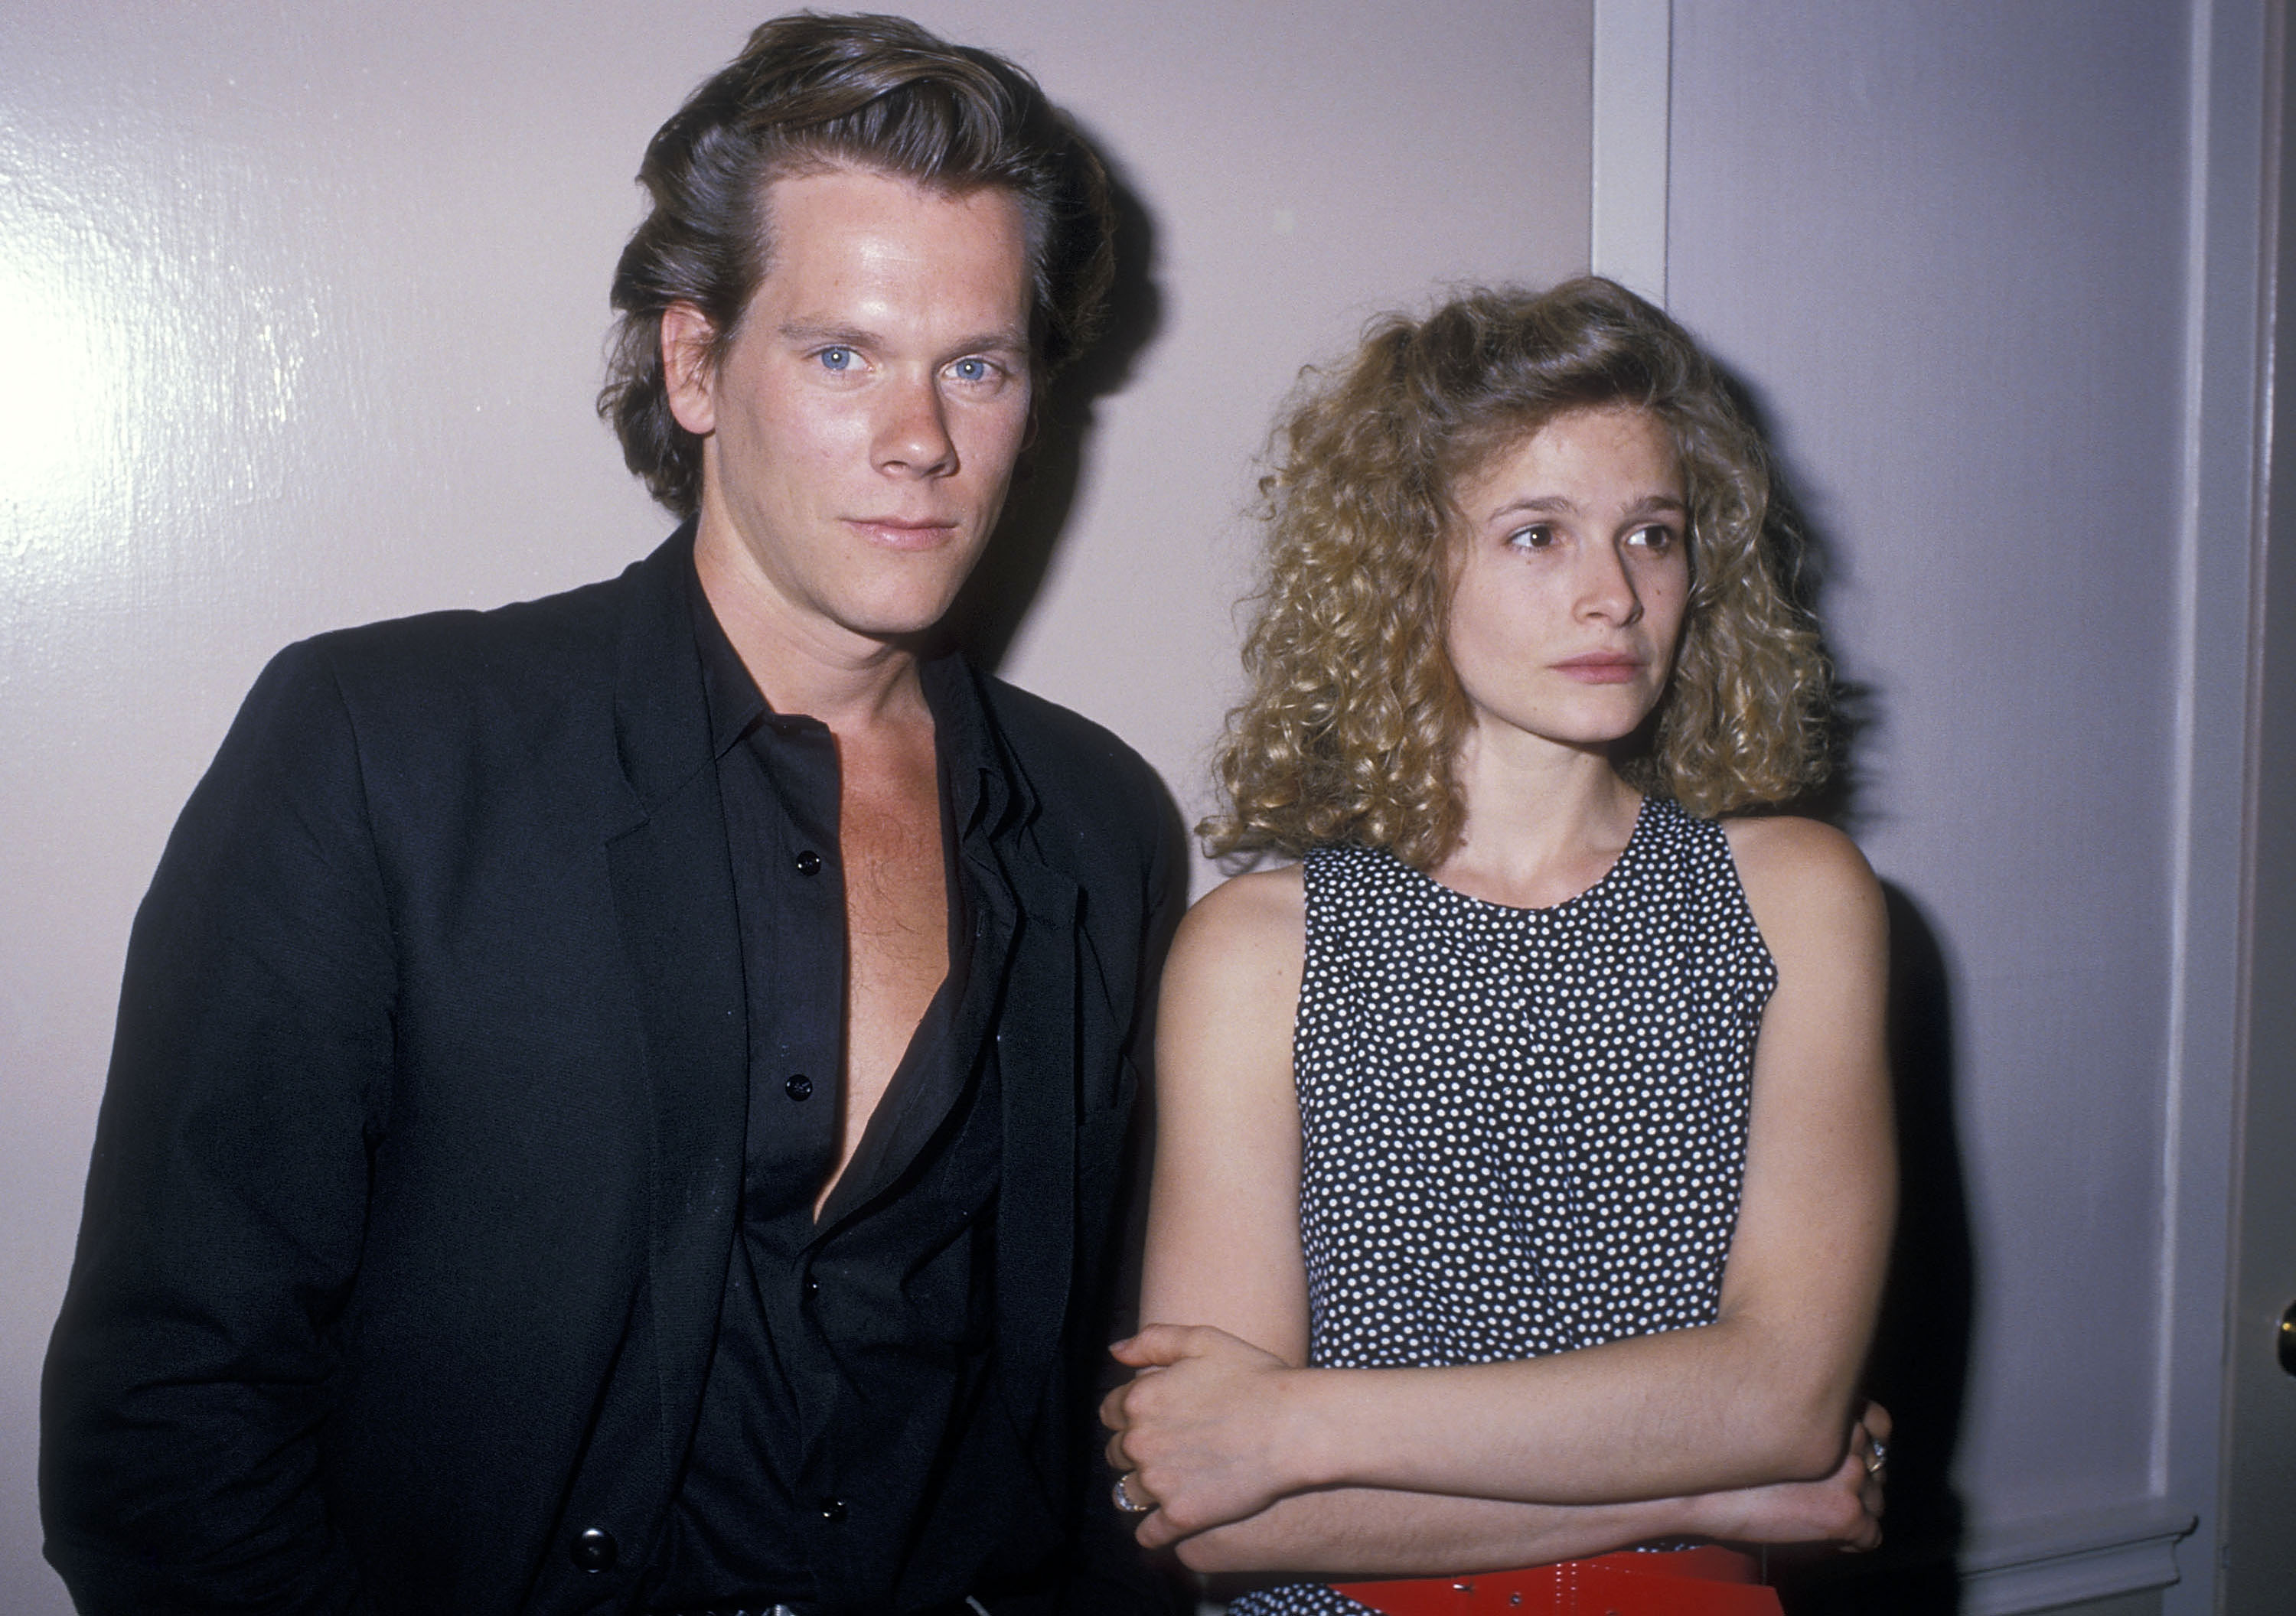 The Longest Fight Kevin Bacon and Kyra Sedgwick Ever Had